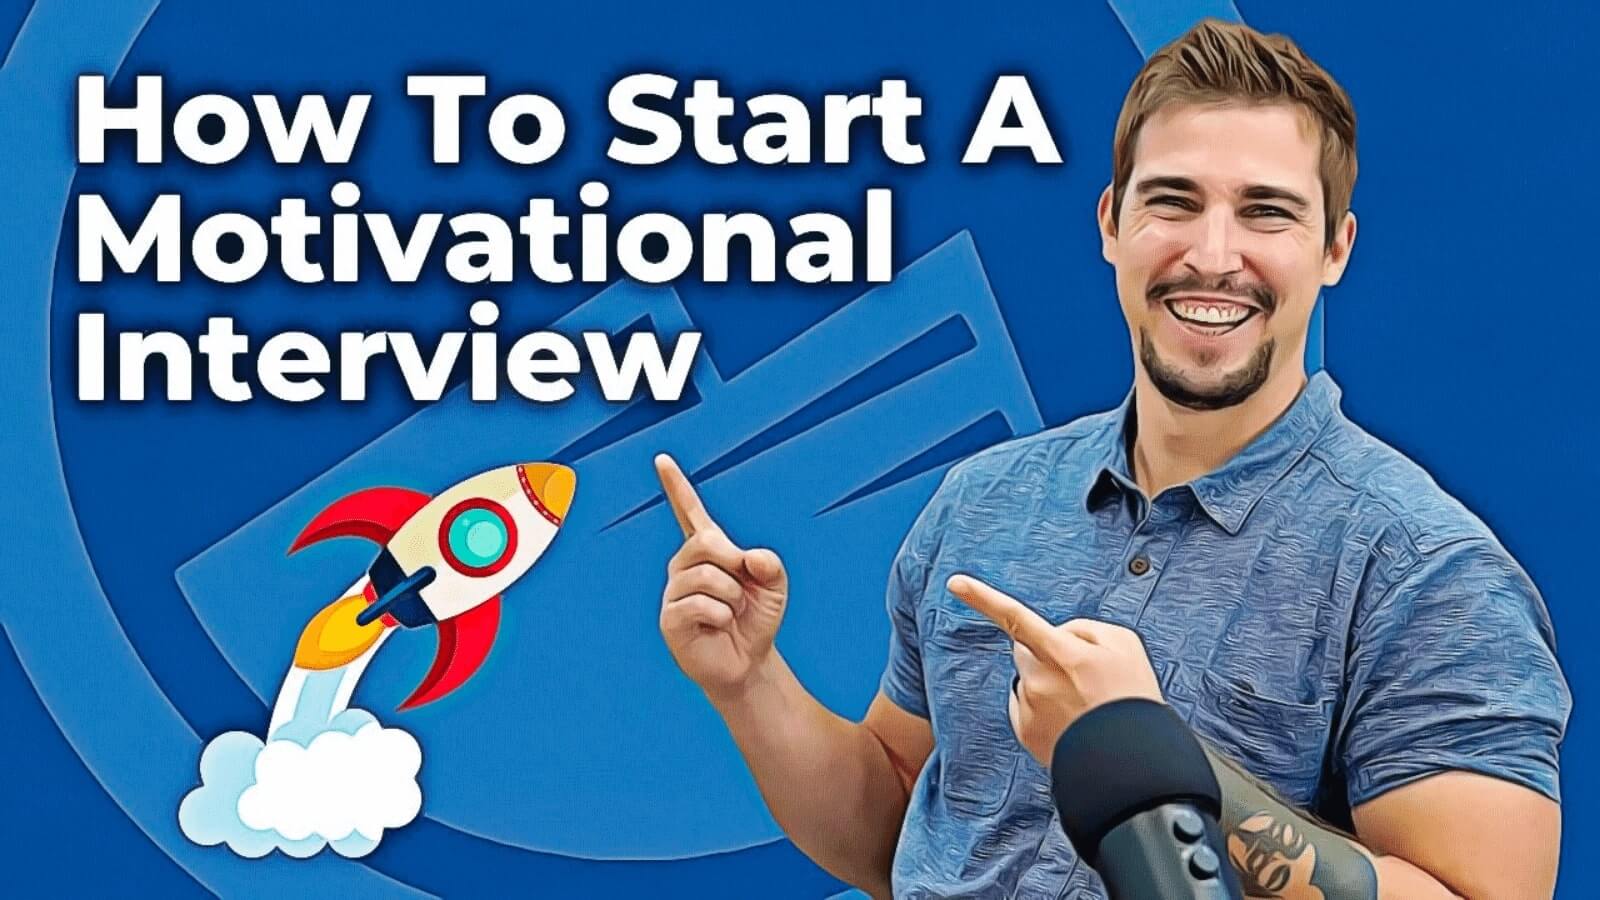 How to start a motivational interview video thumbnail